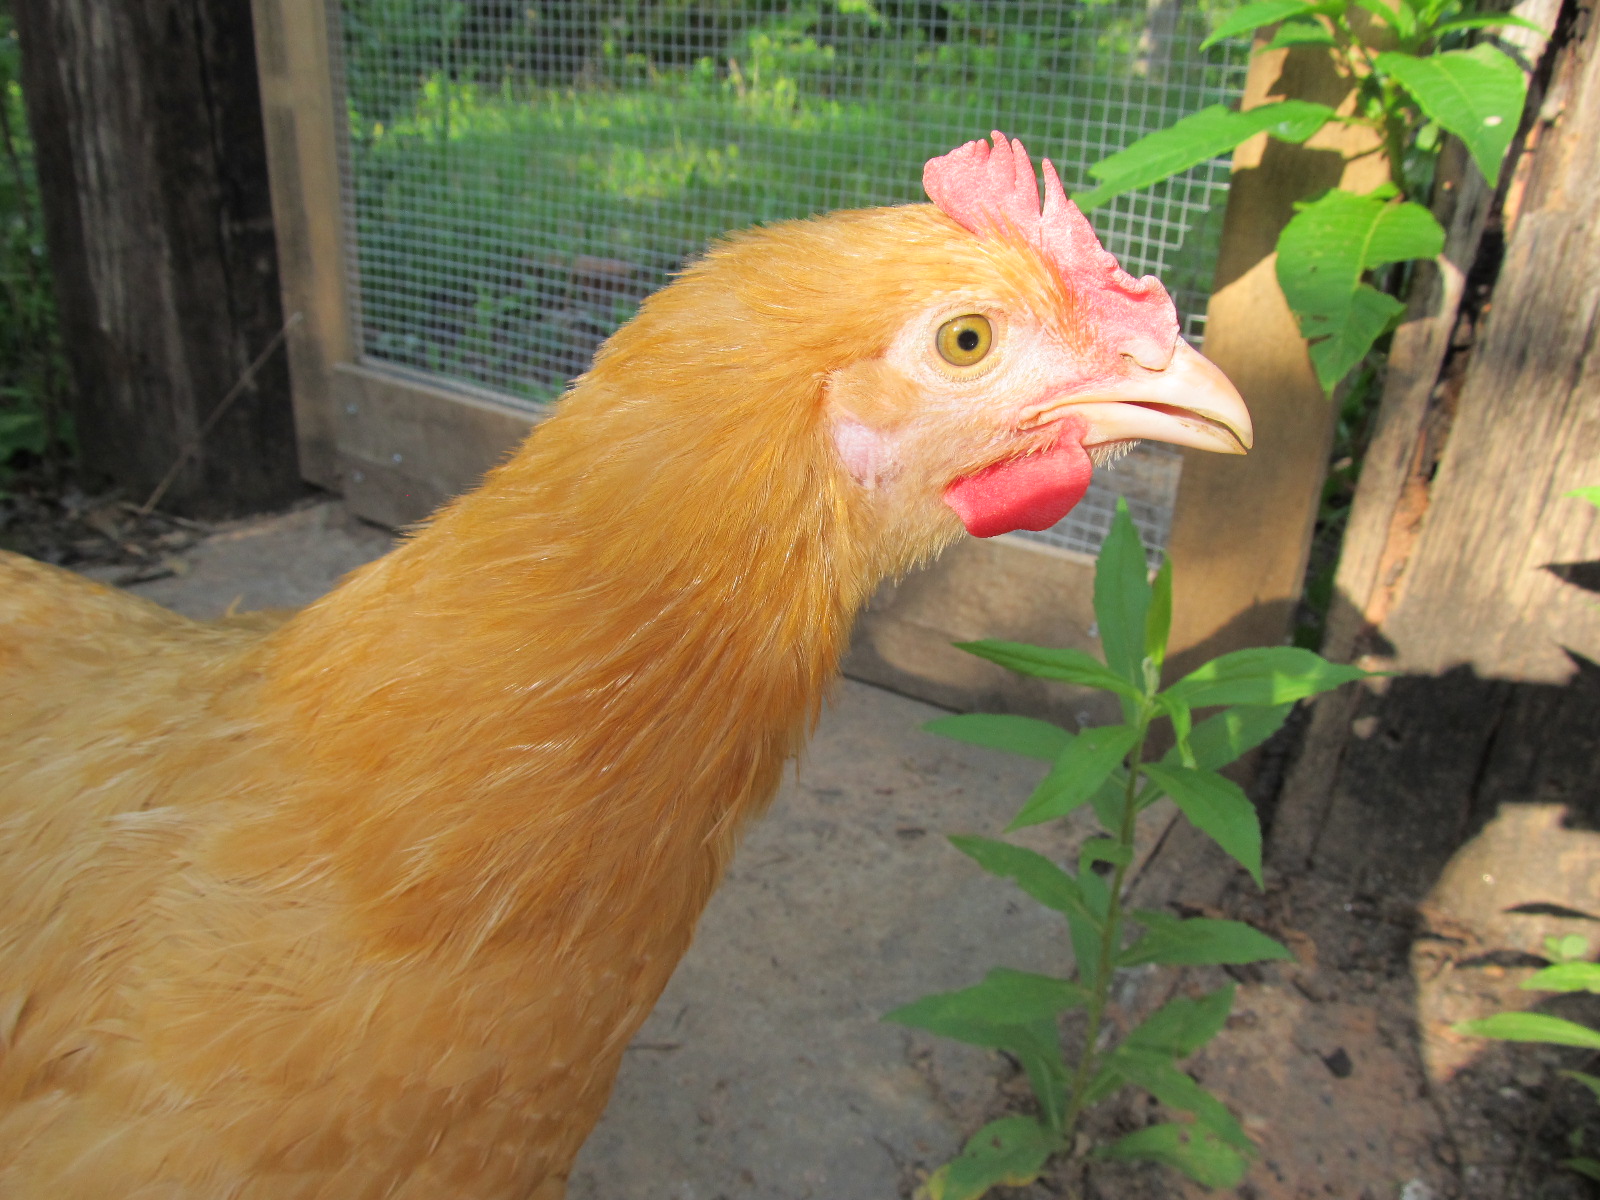 The Rooster Formerly Known As Dorothy. I am smitten.